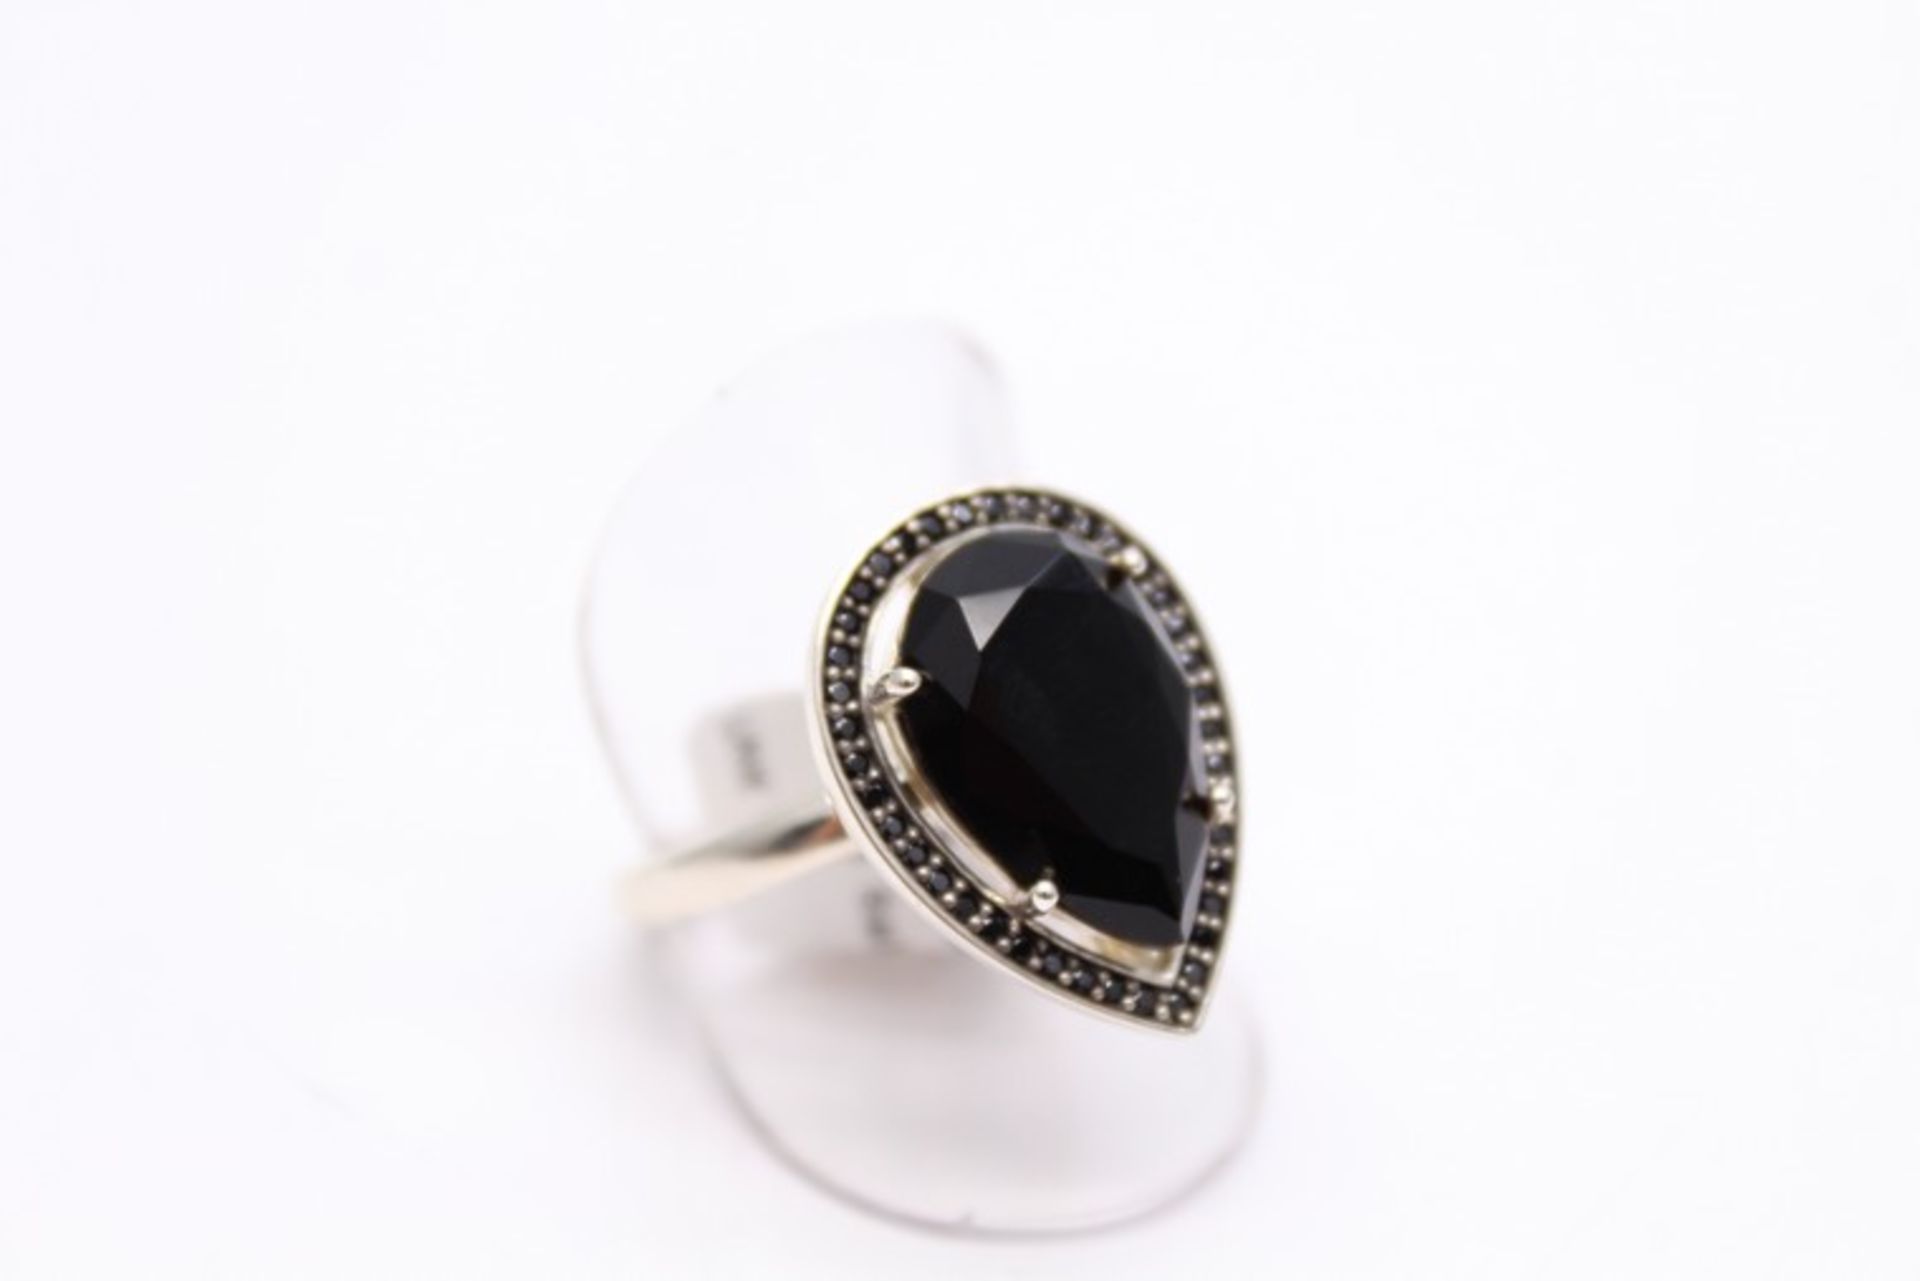 1 x BOXED BRAND NEW THOMAS SARBO GLAM STONE RING RRP £145 *PLEASE NOTE THAT THE BID PRICE IS